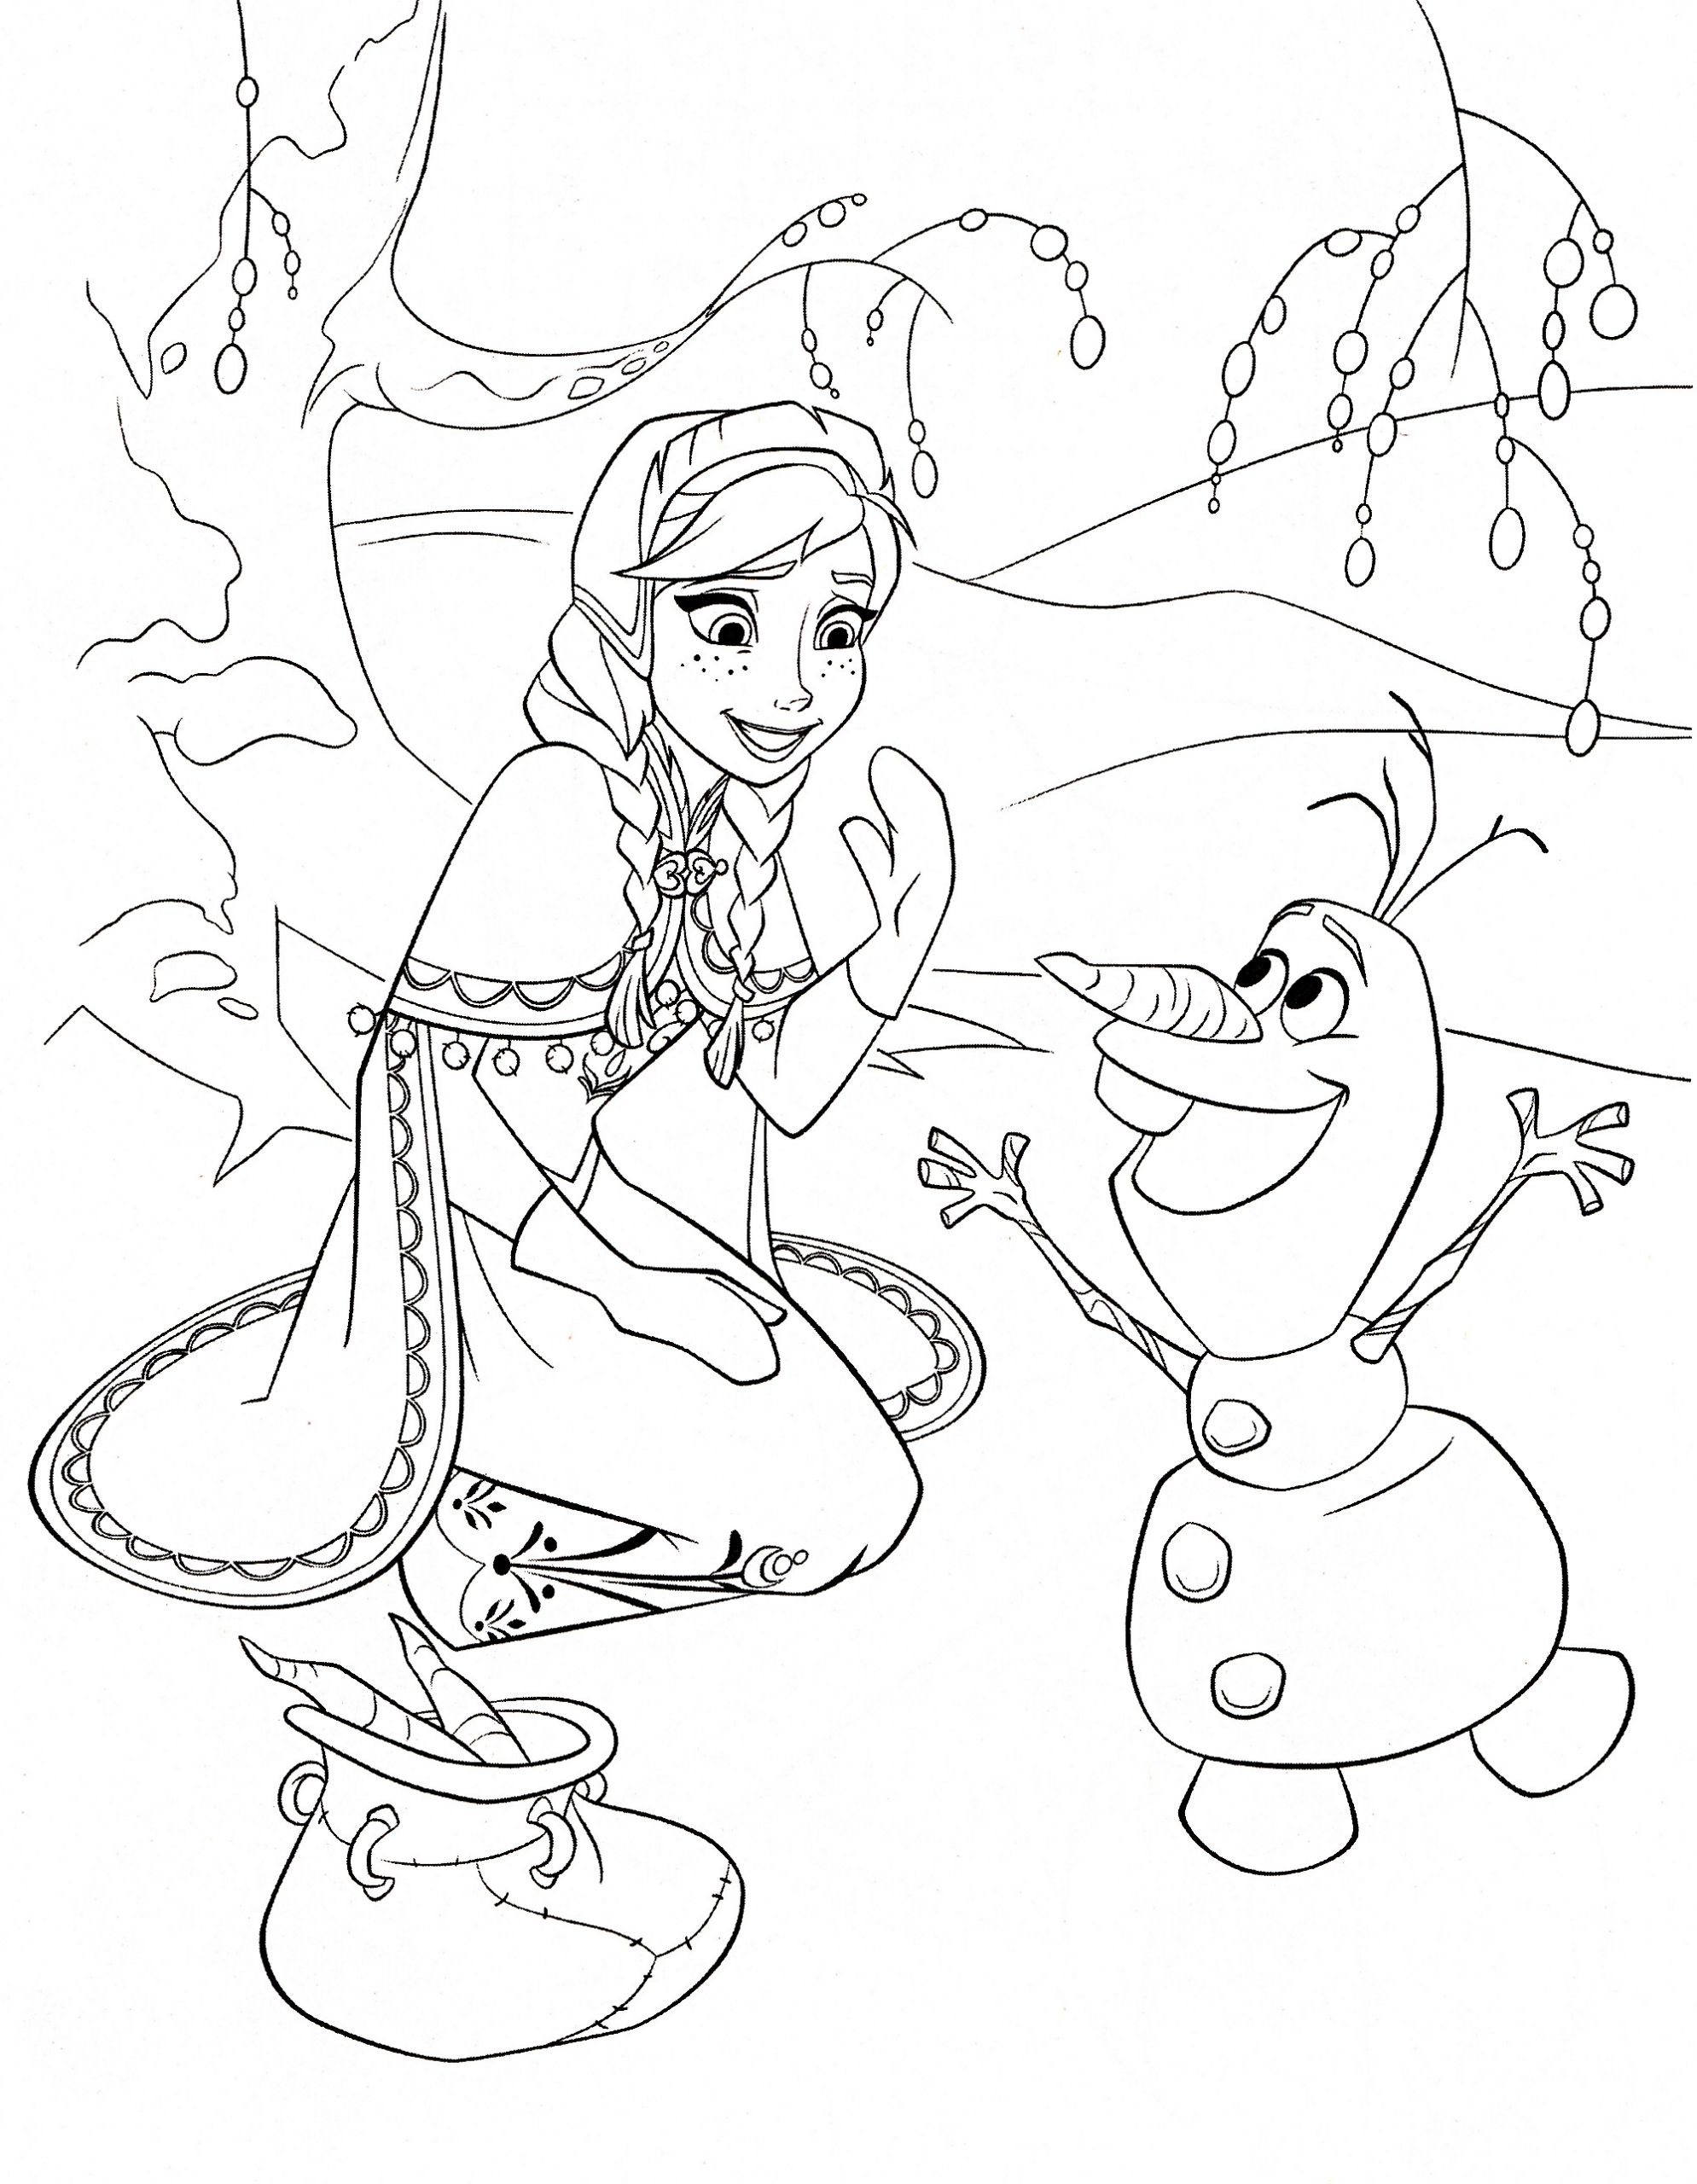 Kids Coloring Pages Frozen
 FREE Frozen Printable Coloring & Activity Pages Plus FREE